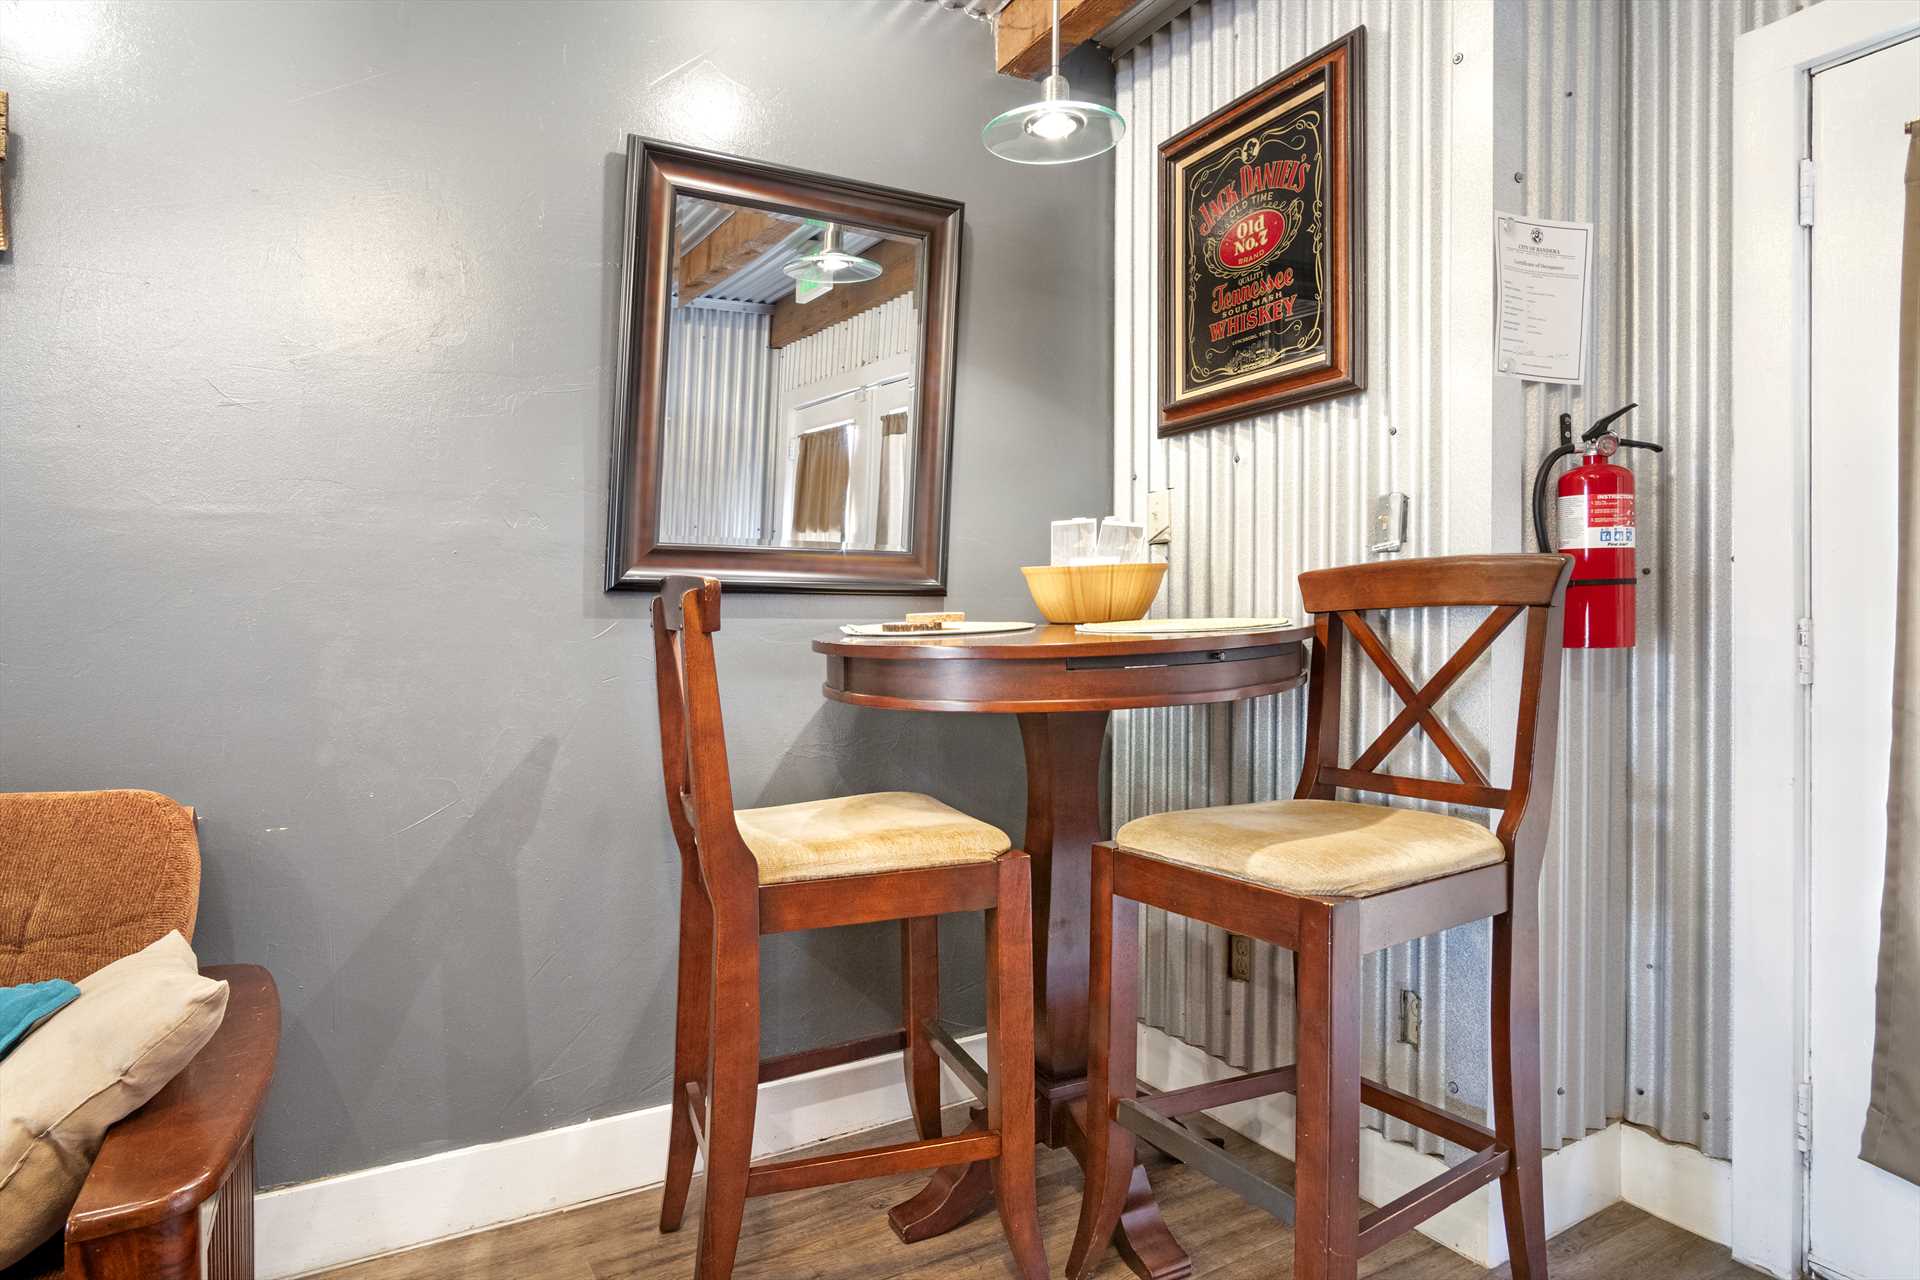                                                 Have a chat and a morning's wake-up beverage or meal in the cozy breakfast nook!